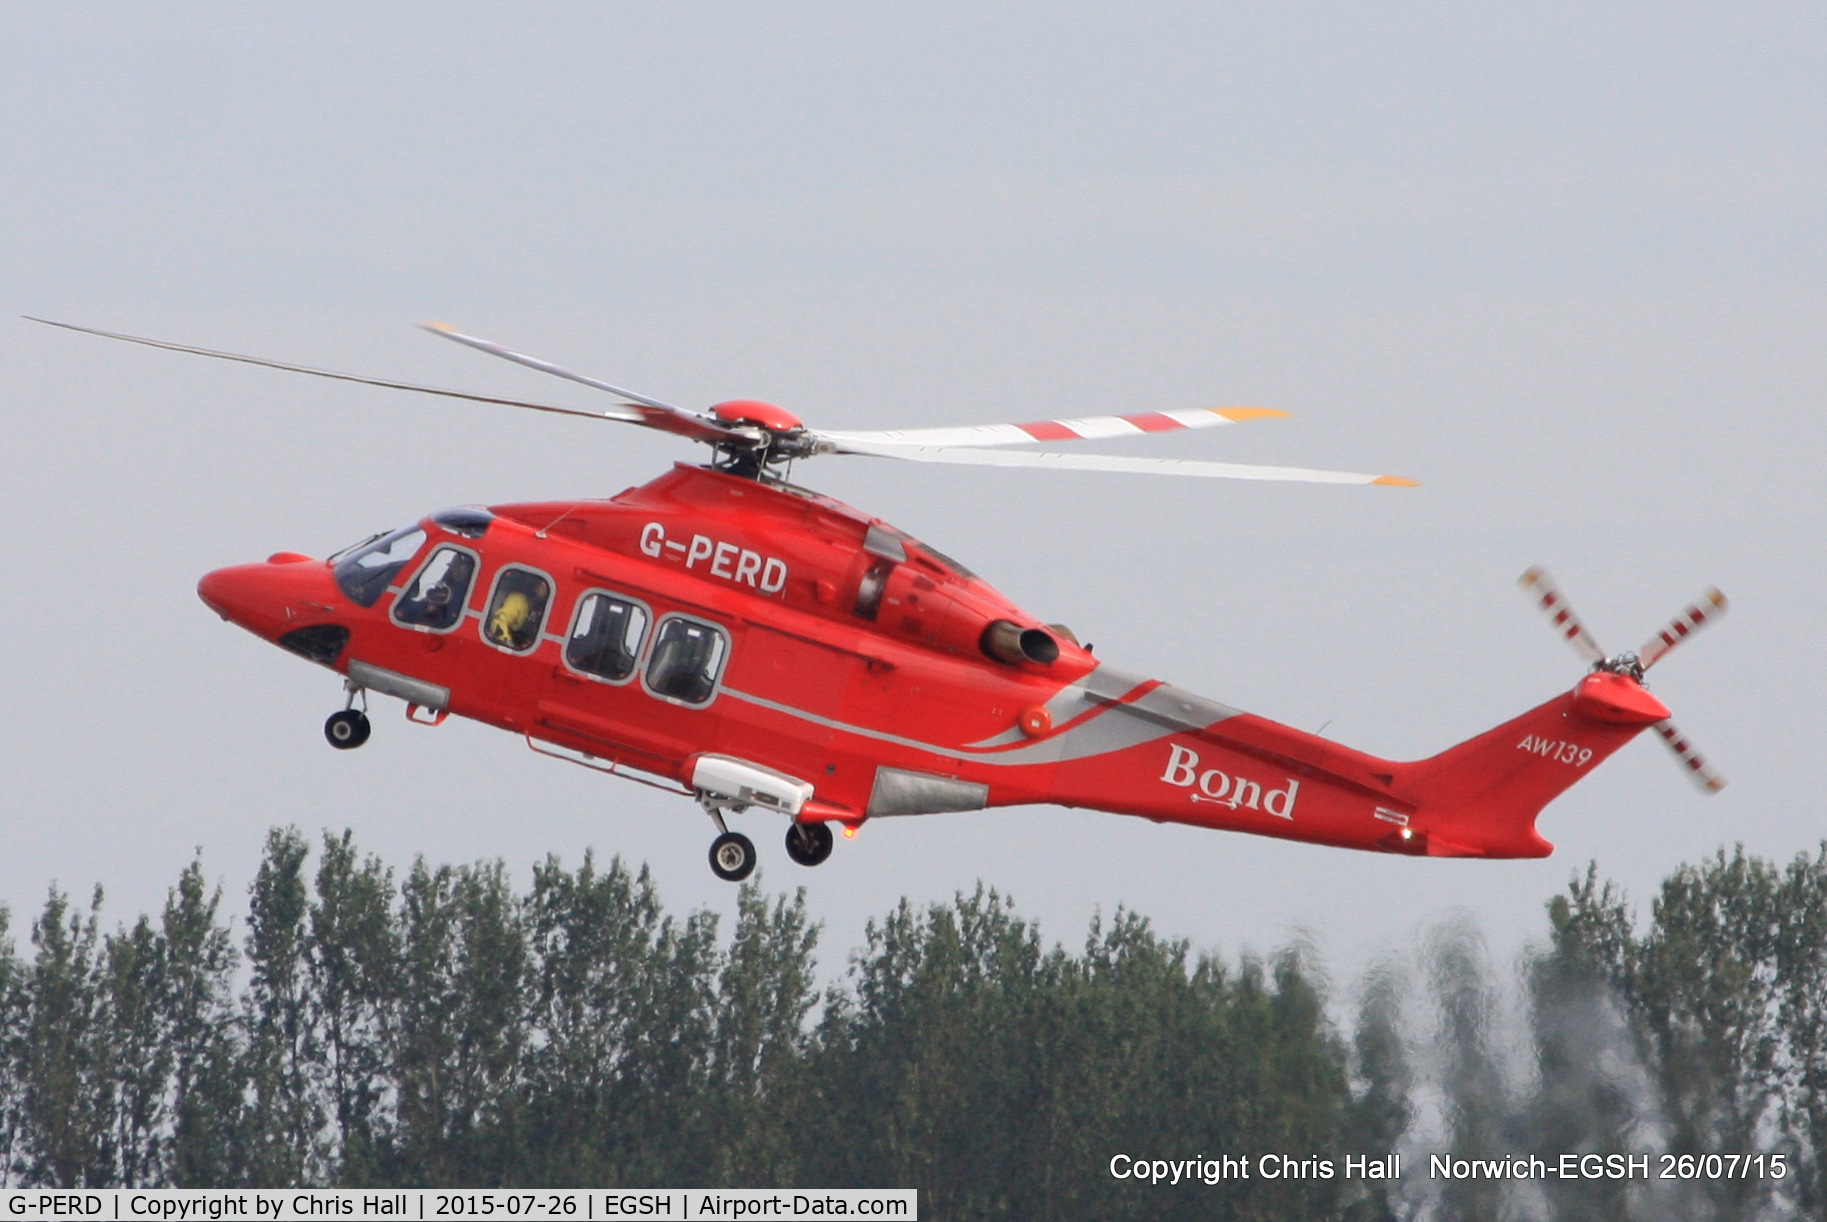 G-PERD, 2012 AgustaWestland AW-139 C/N 41270, Bond Offshore Helicopters Ltd